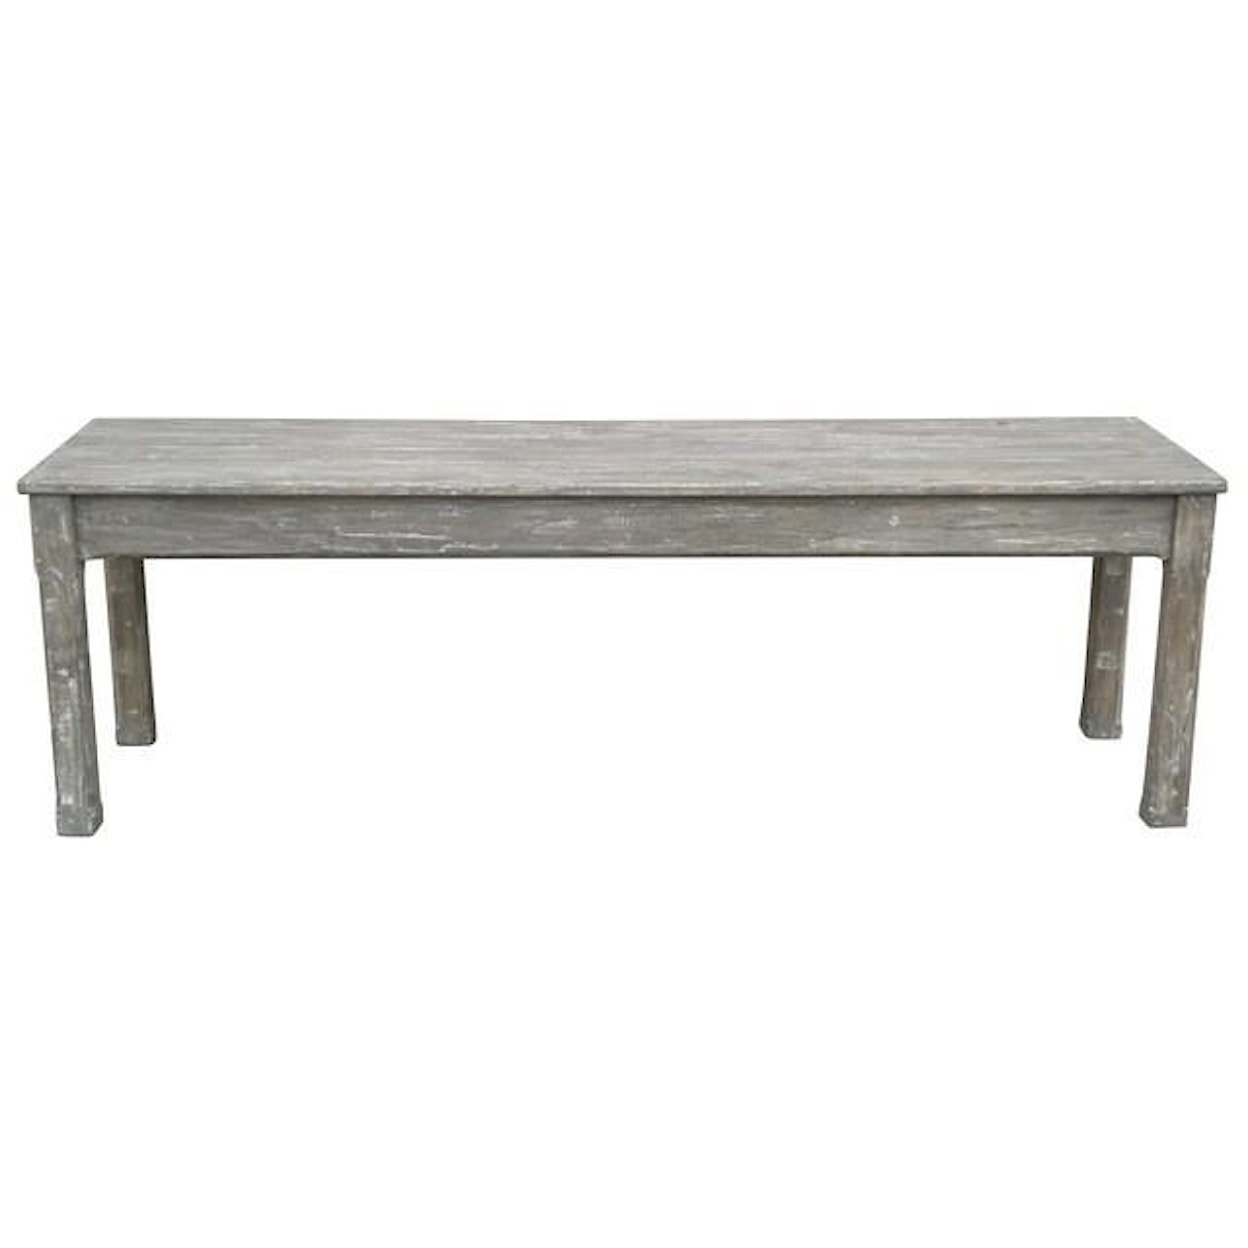 Trade Winds Furniture Casual Dining Cottage Queen Bench